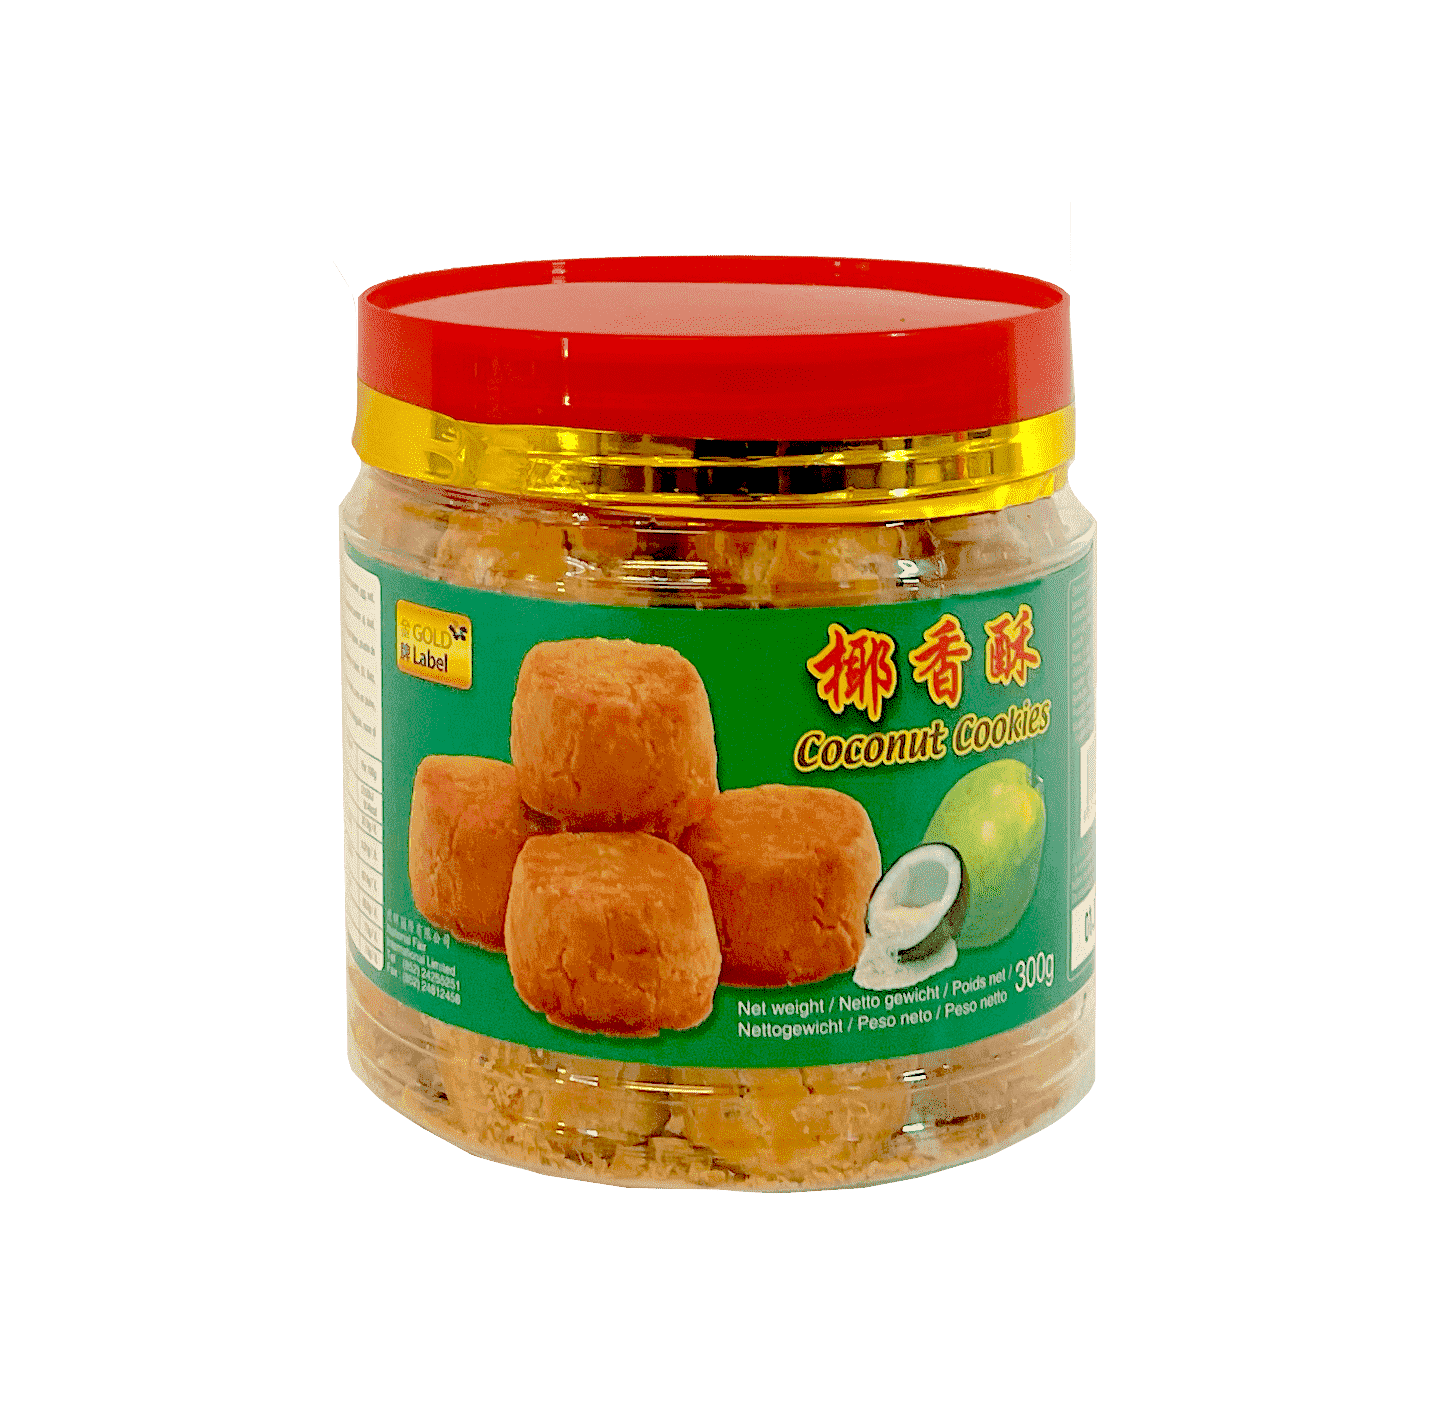 Cookies Coconut 300g Gold Label Malaysia